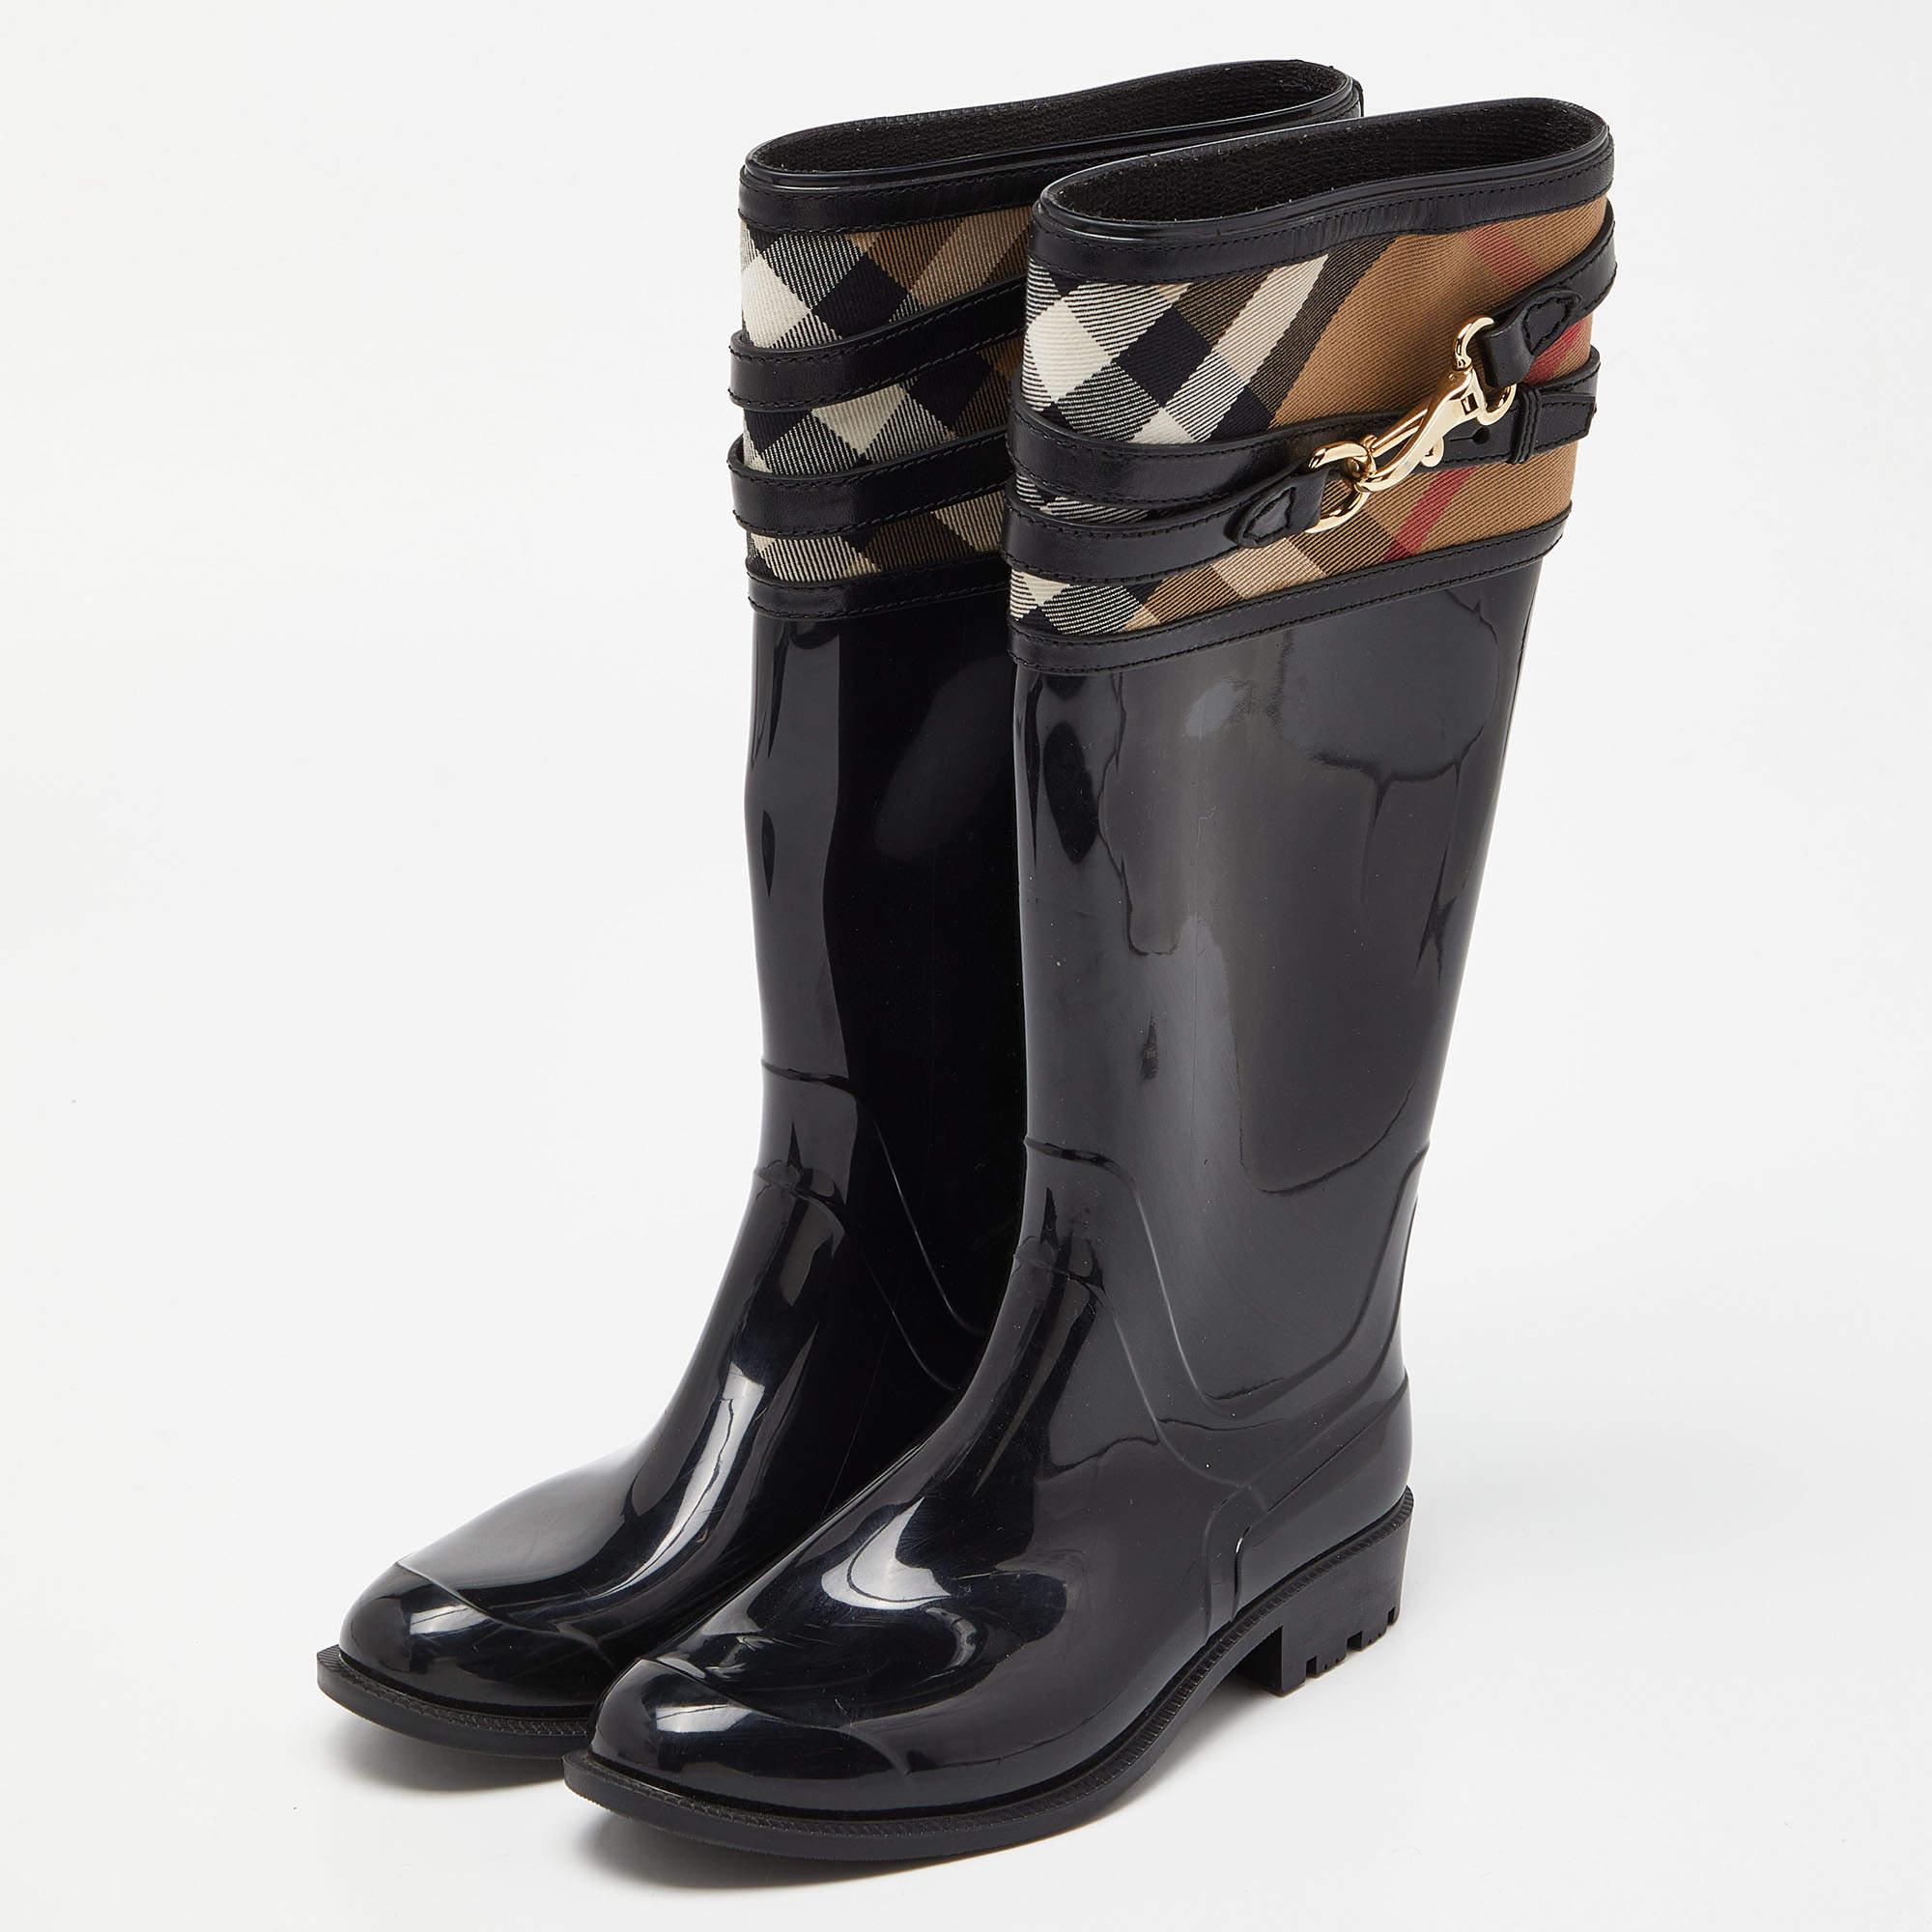 Show up on a rainy day with style in these rain boots from Burberry. They are made of rubber and styled with House Check canvas inserts and strap detailing. These boots will surely keep you dry and stylish.

